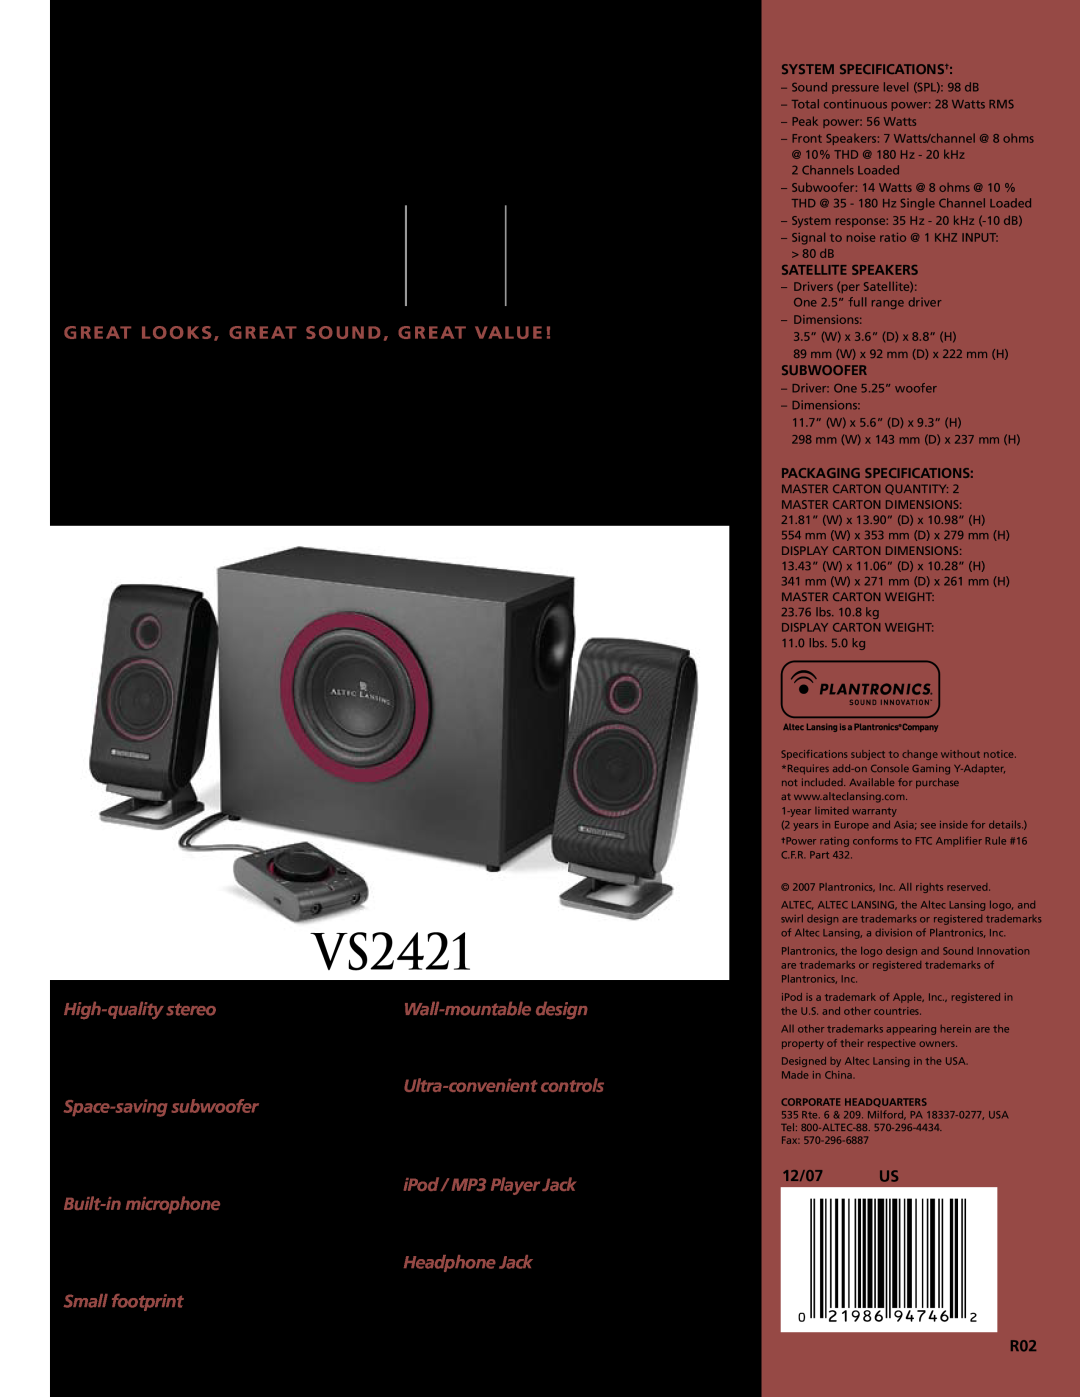 Altec Lansing VS2421 manual Watts Watts, Great looks, great sound, great value, High-qualitystereo, Space-savingsubwoofer 